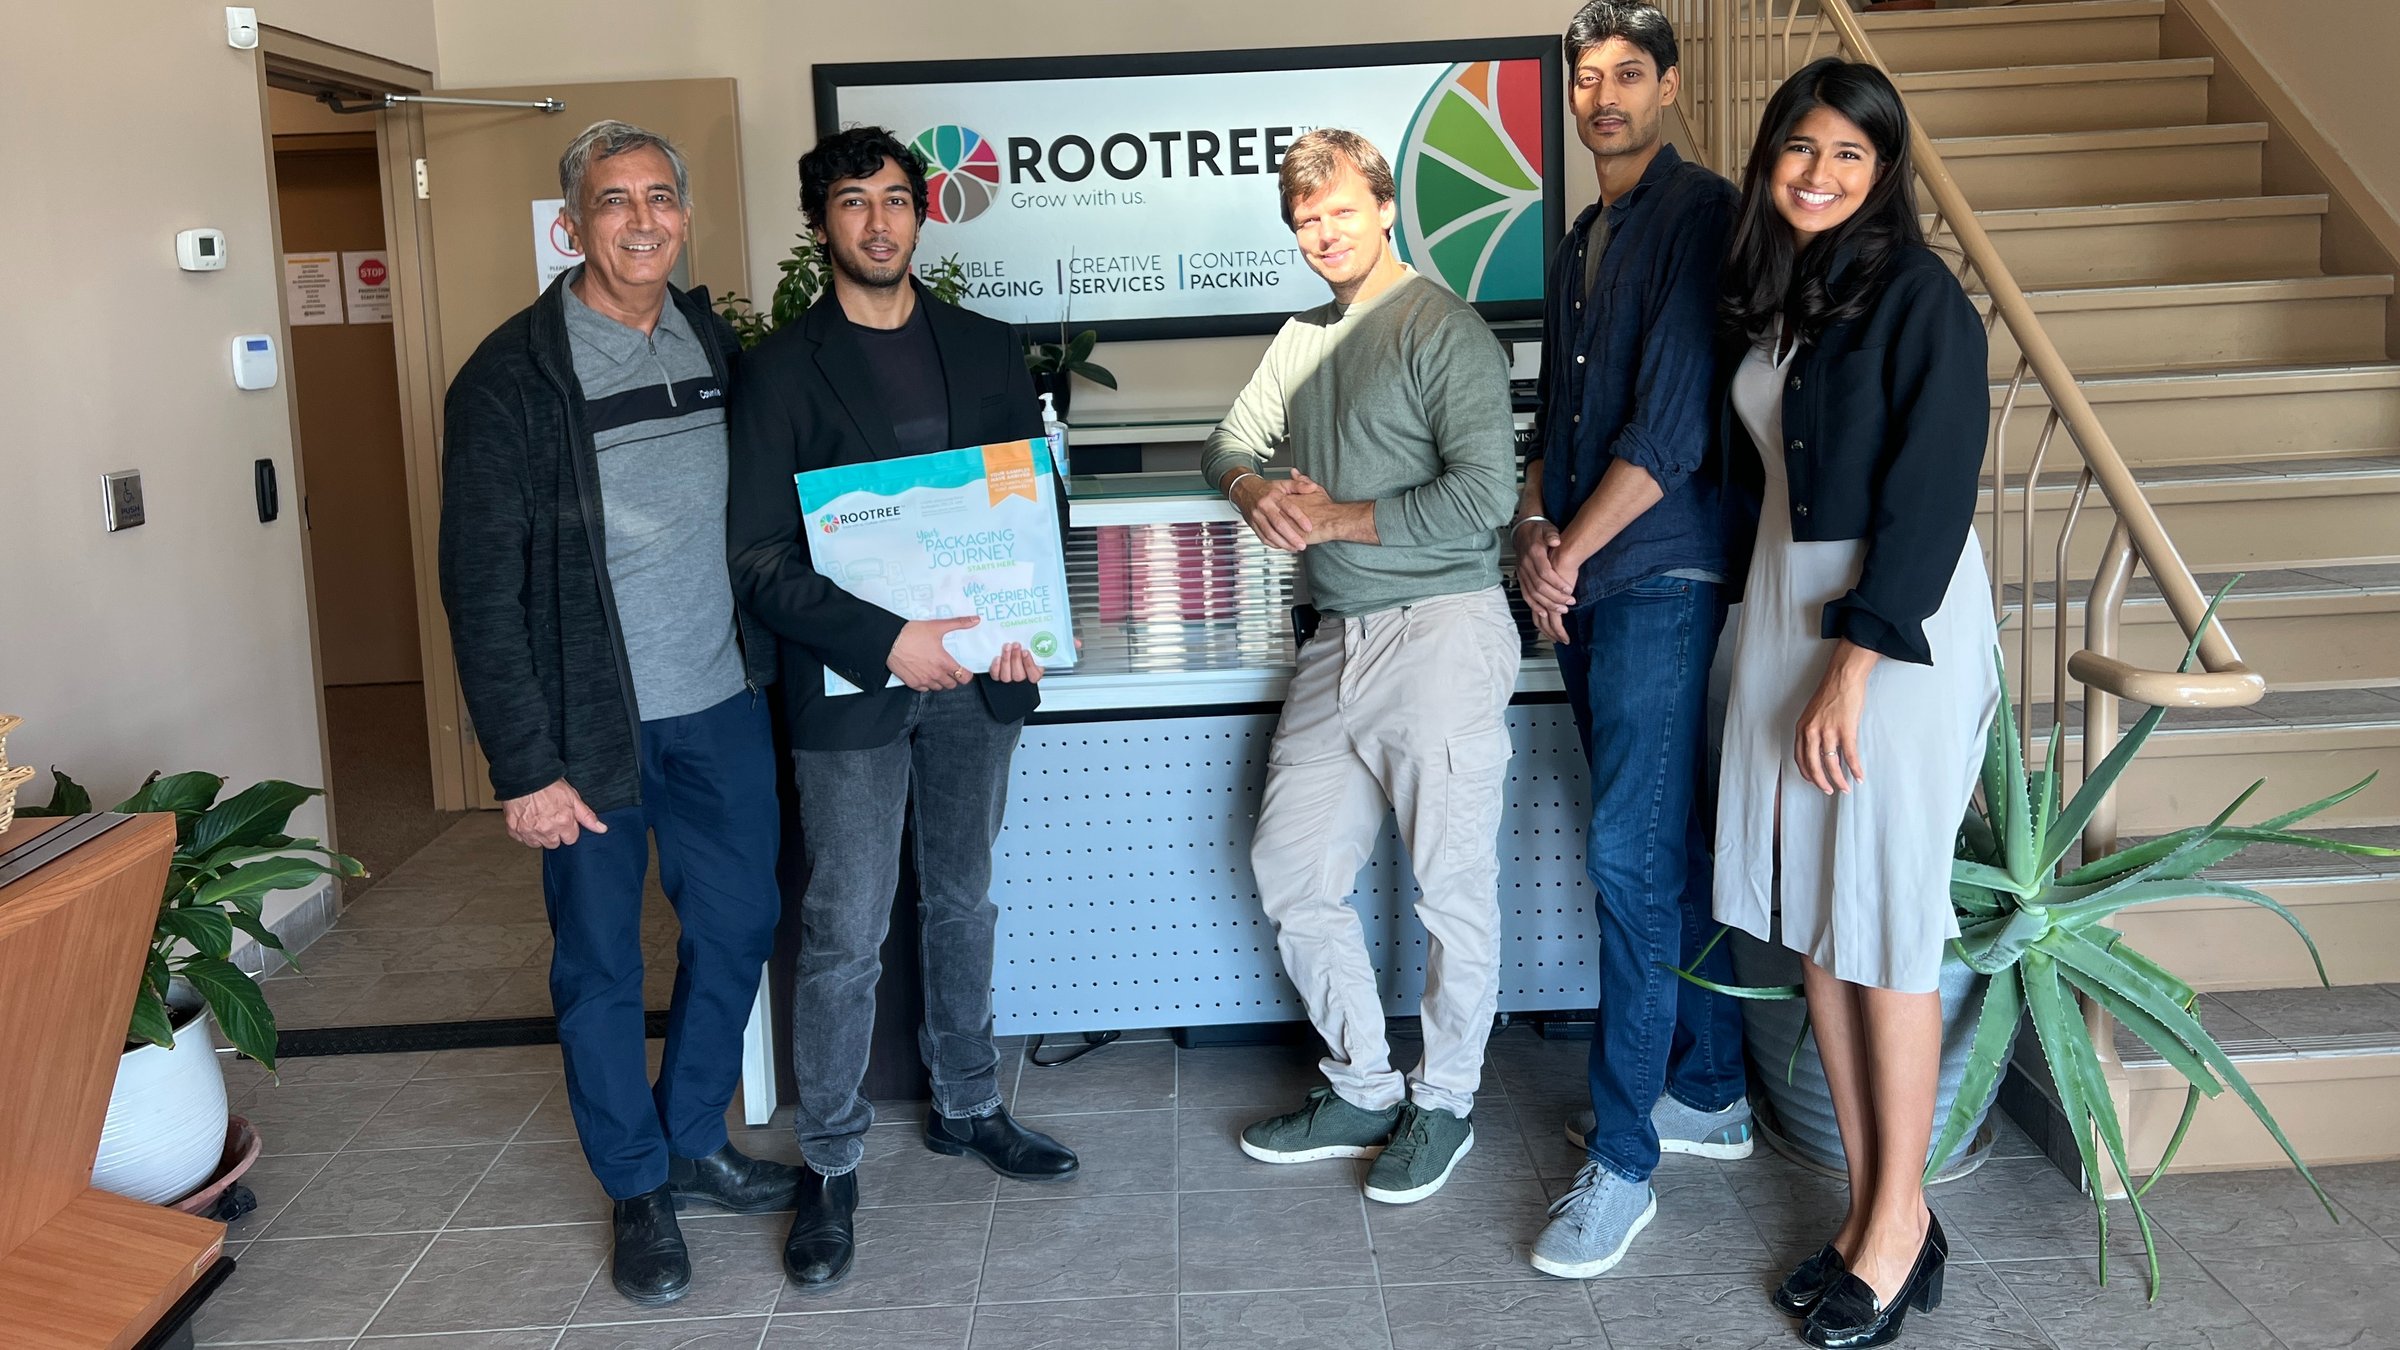 India Dscoopers Fly 14,000 Miles to Learn from Rootree and Geostick